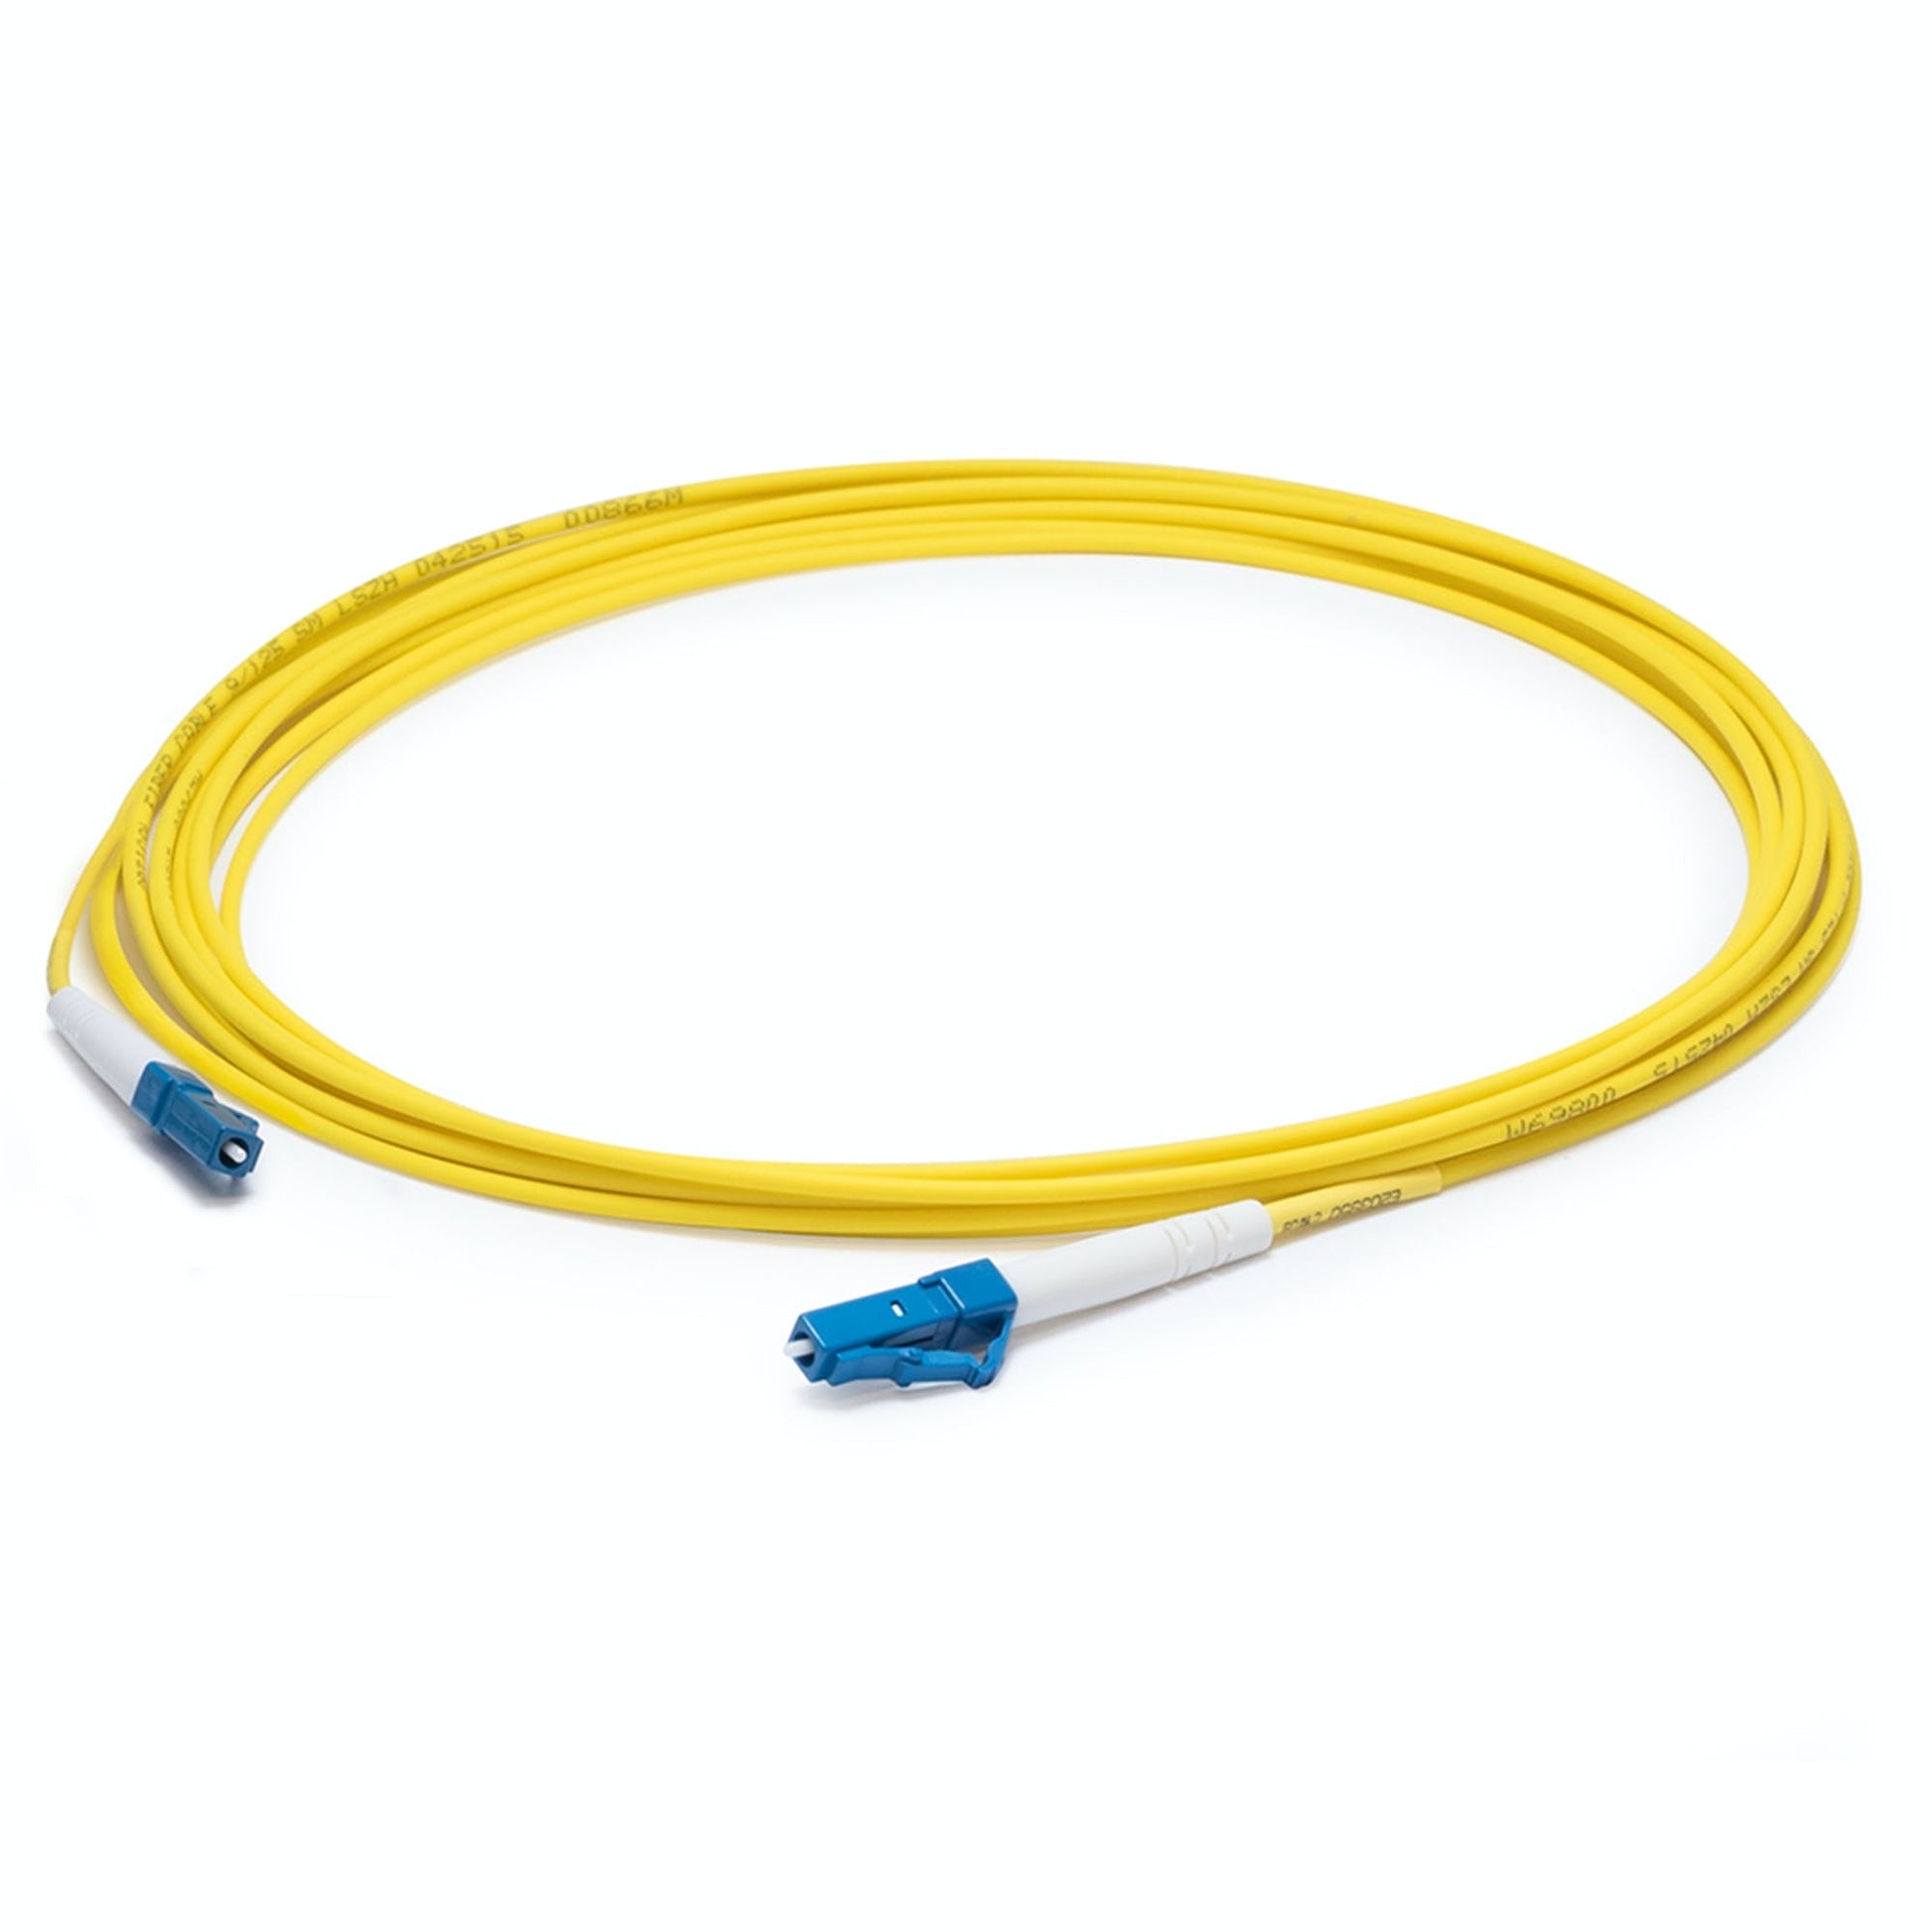 Addon Networks Add-Lc-Lc-28Ms9Smfp Fibre Optic Cable 28 M Ofnp Os2 Yellow